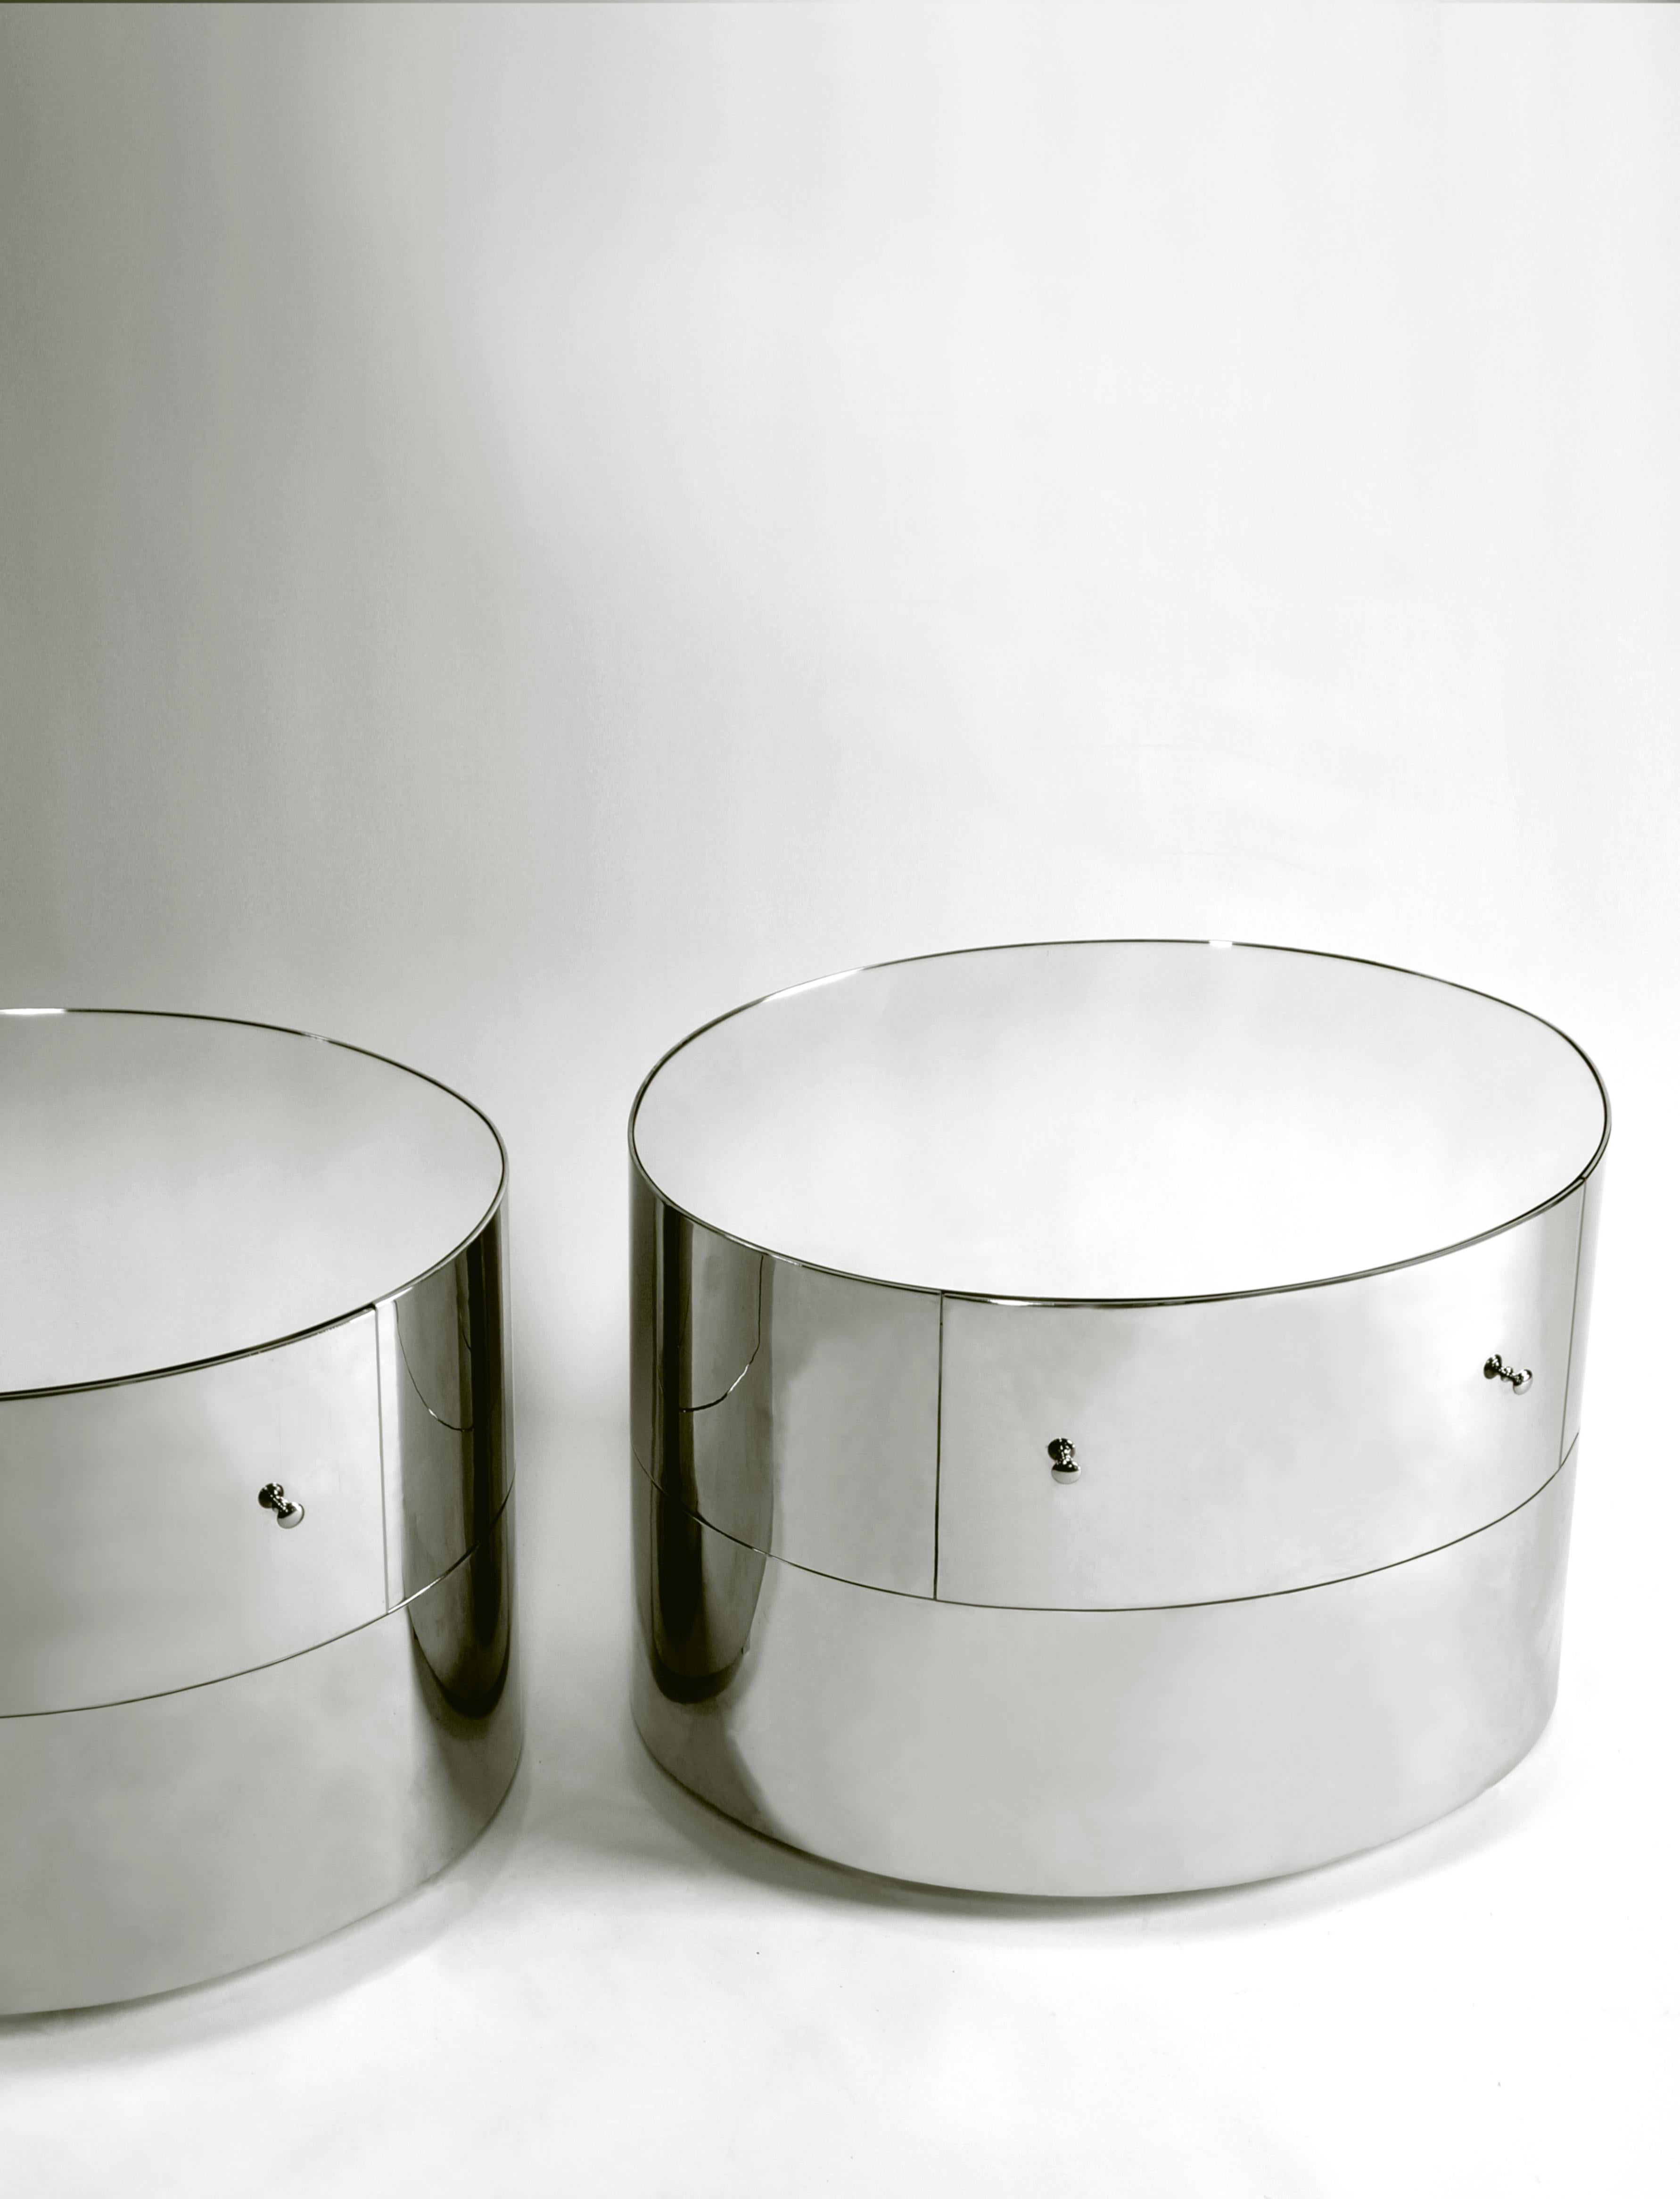 The mirrored side table has a distinct elliptical profile and is made from hand bent cold rolled steel. The metal exterior is twice dipped in chrome then nickeled for a subtle reflective color combination. An inlayed mirror sits flush within its